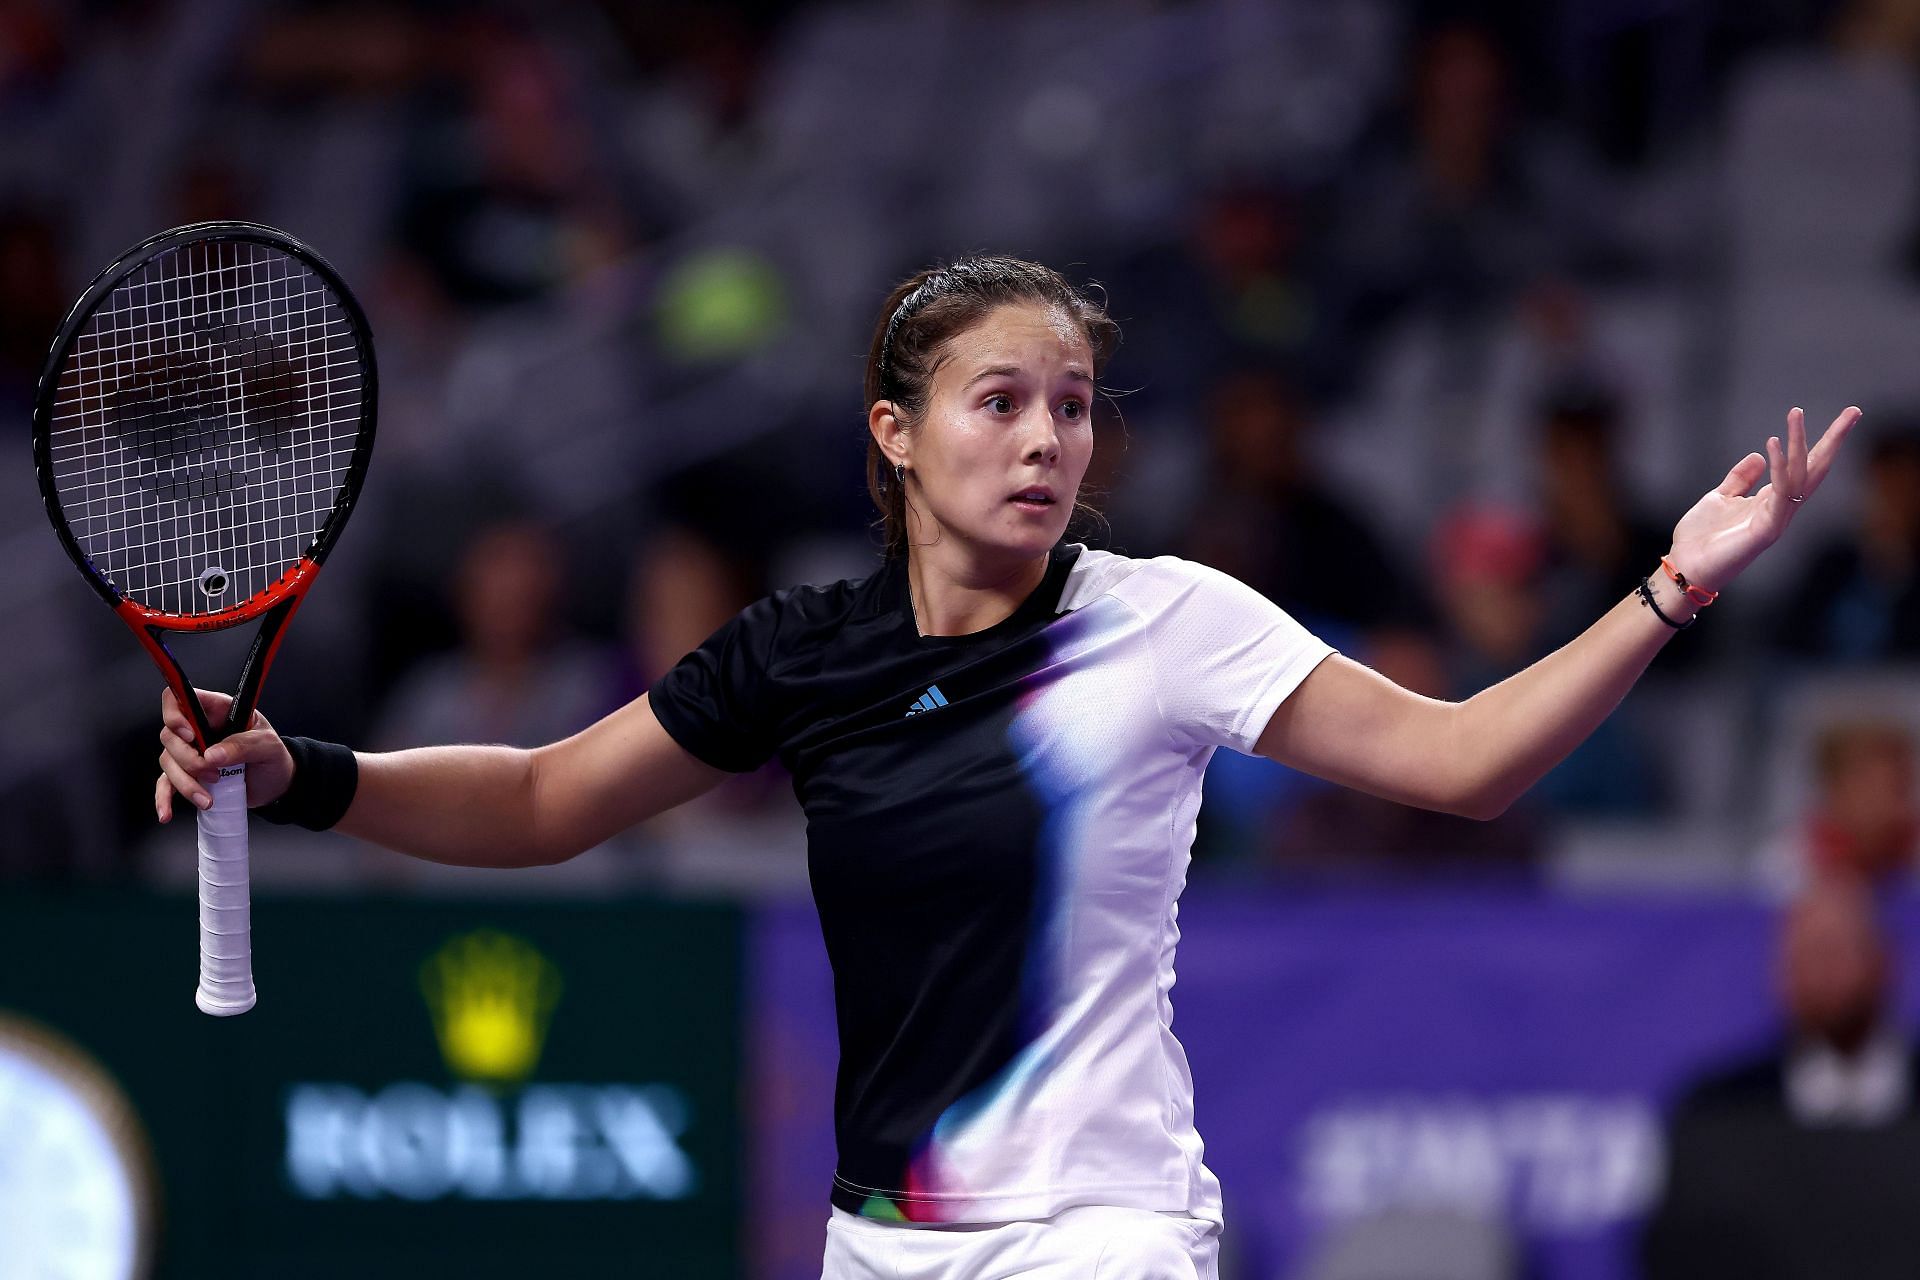 Kasatkina came into the tournament at a career-high ranking of No. 8.